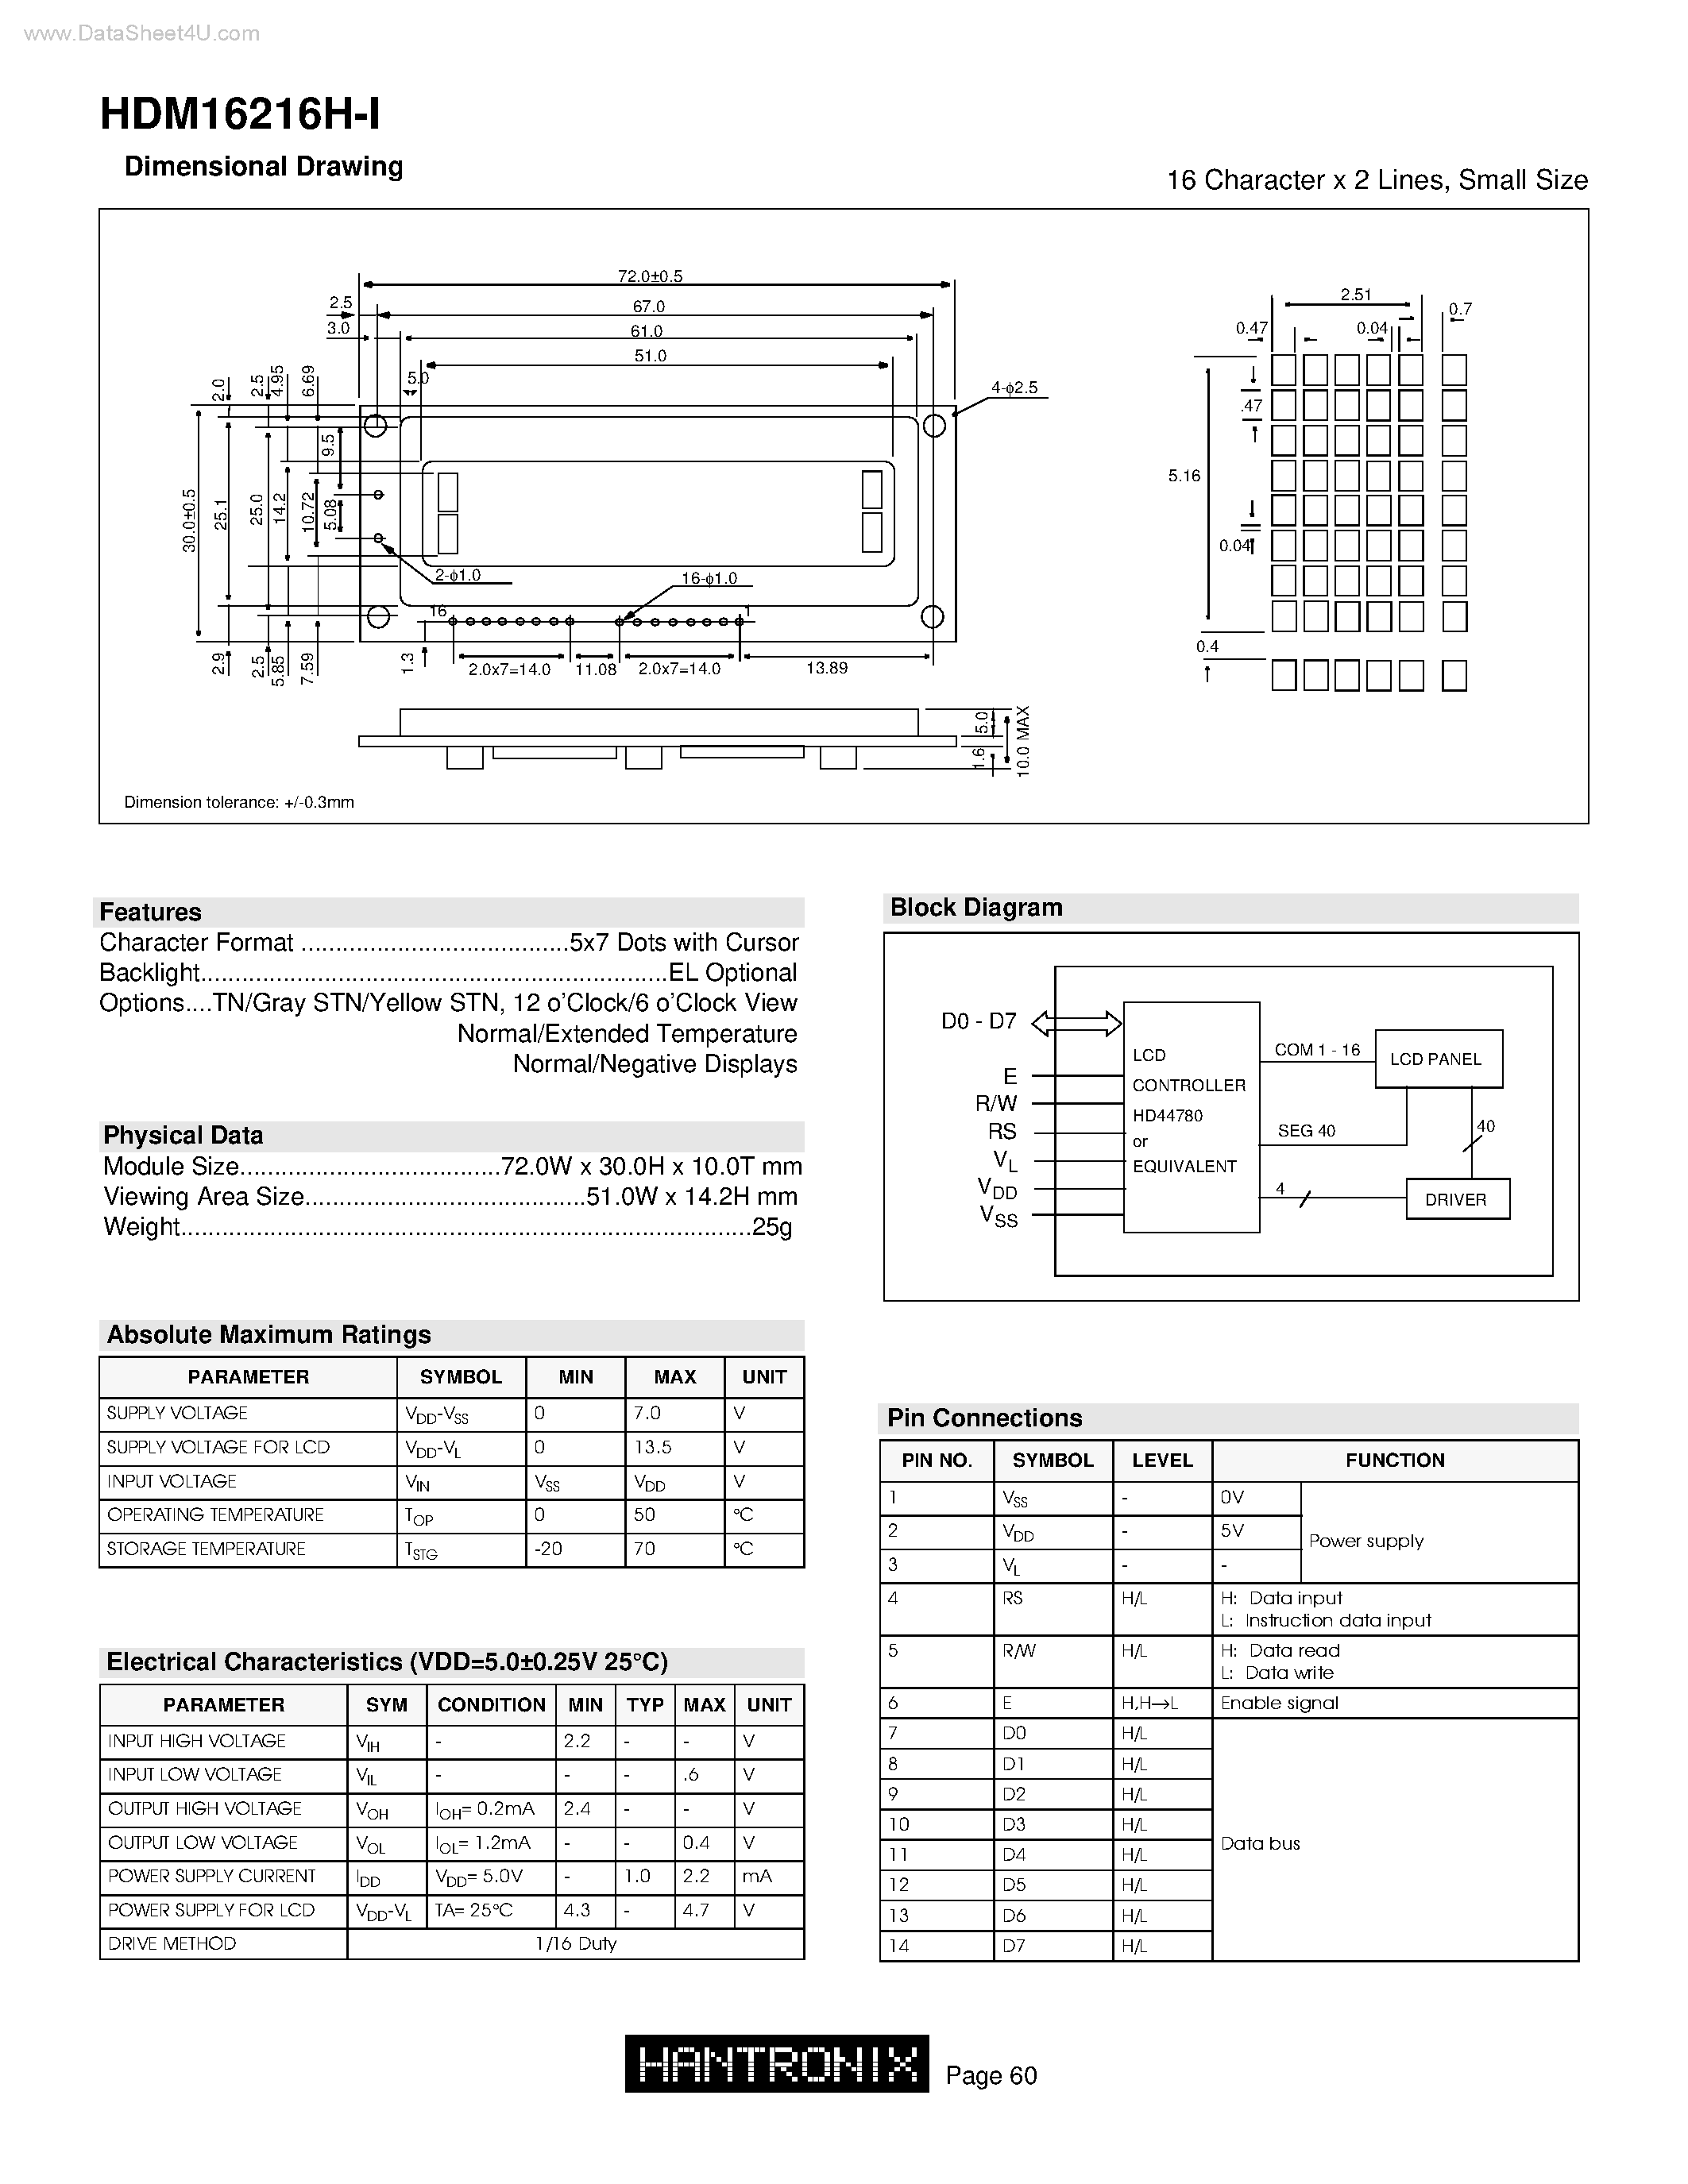 Datasheet HDM16216H-I - 16 Character x 2 Lines page 1